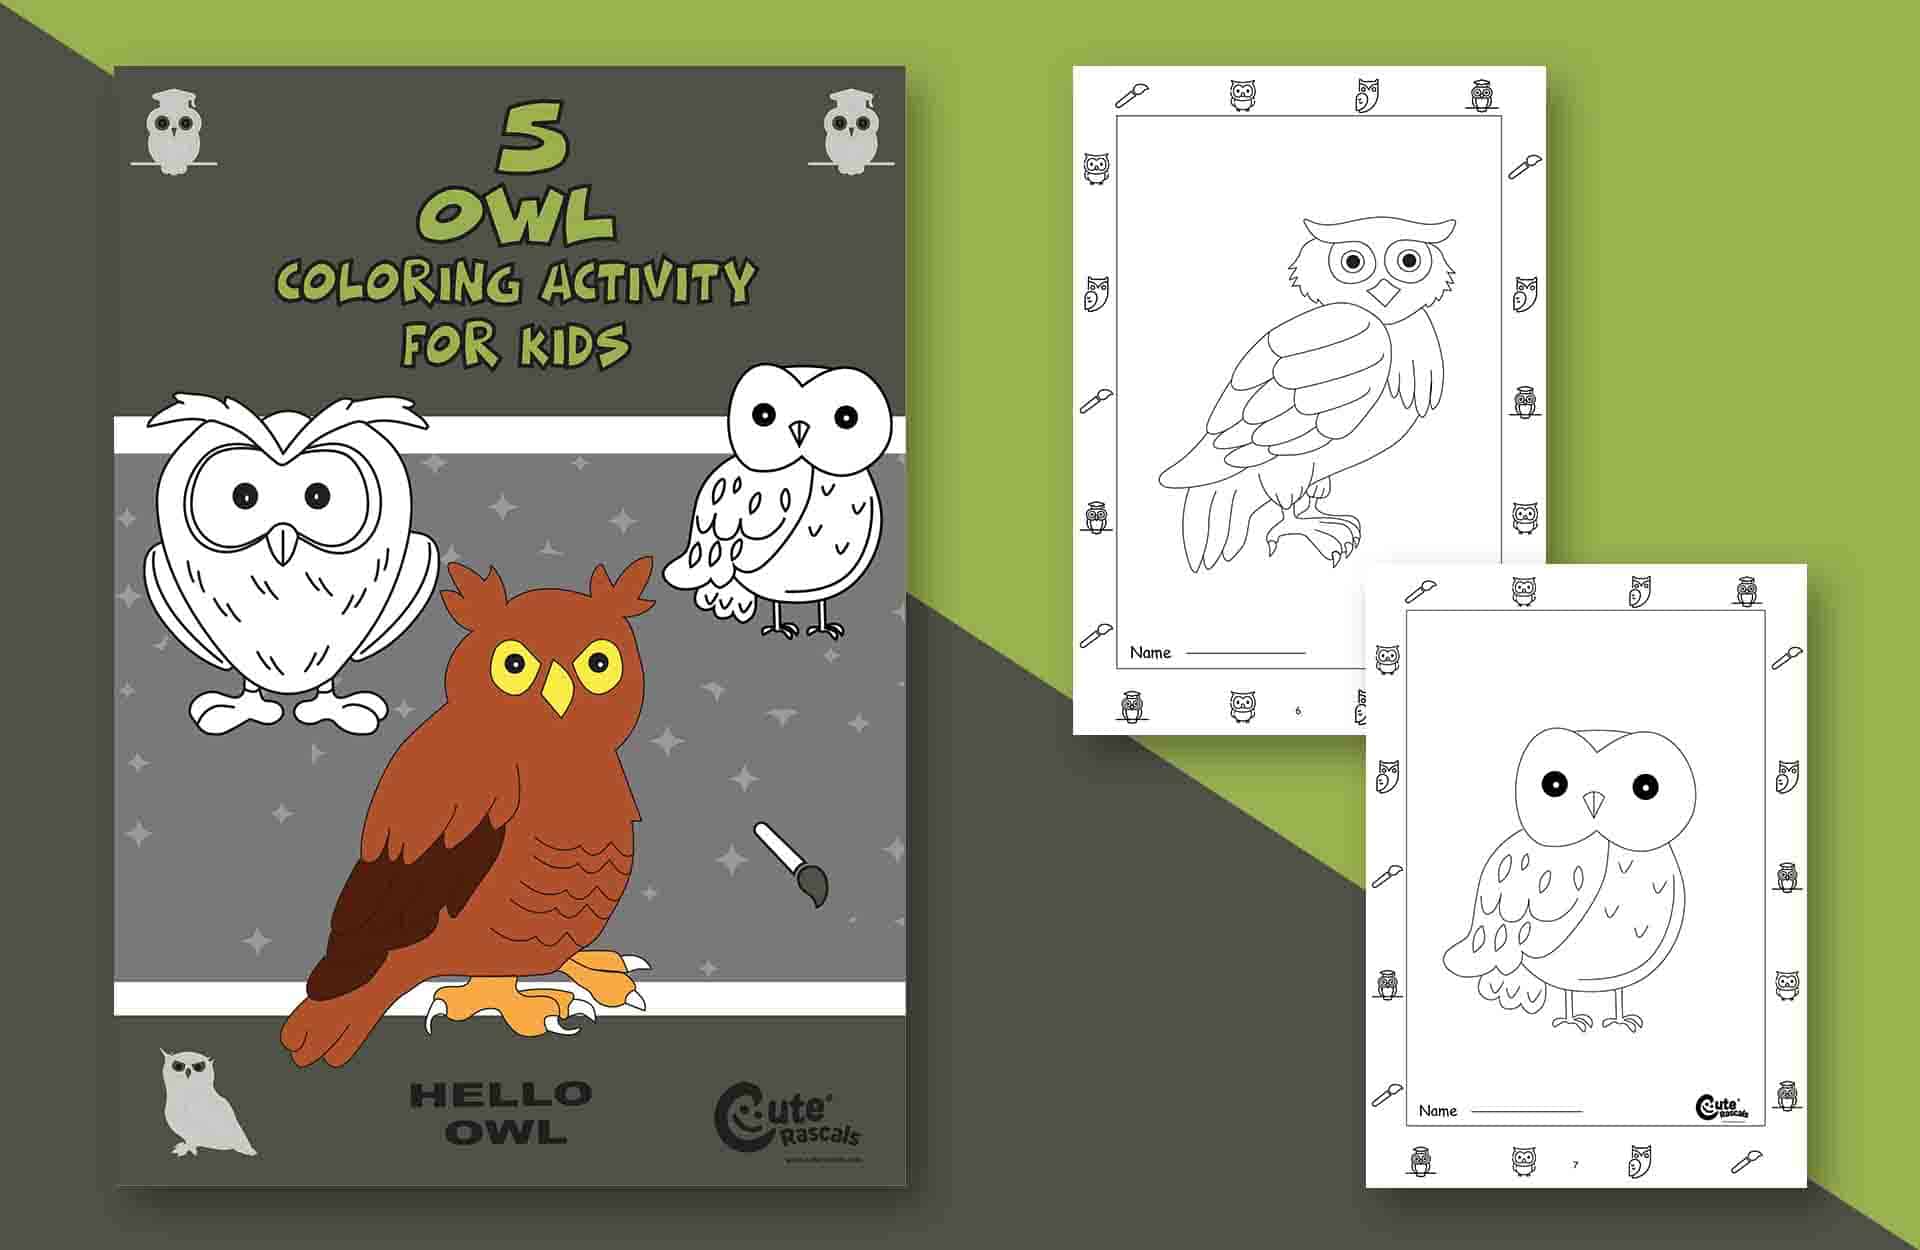 Top 5 Smart Owl Coloring Pages for Kids to Enjoy